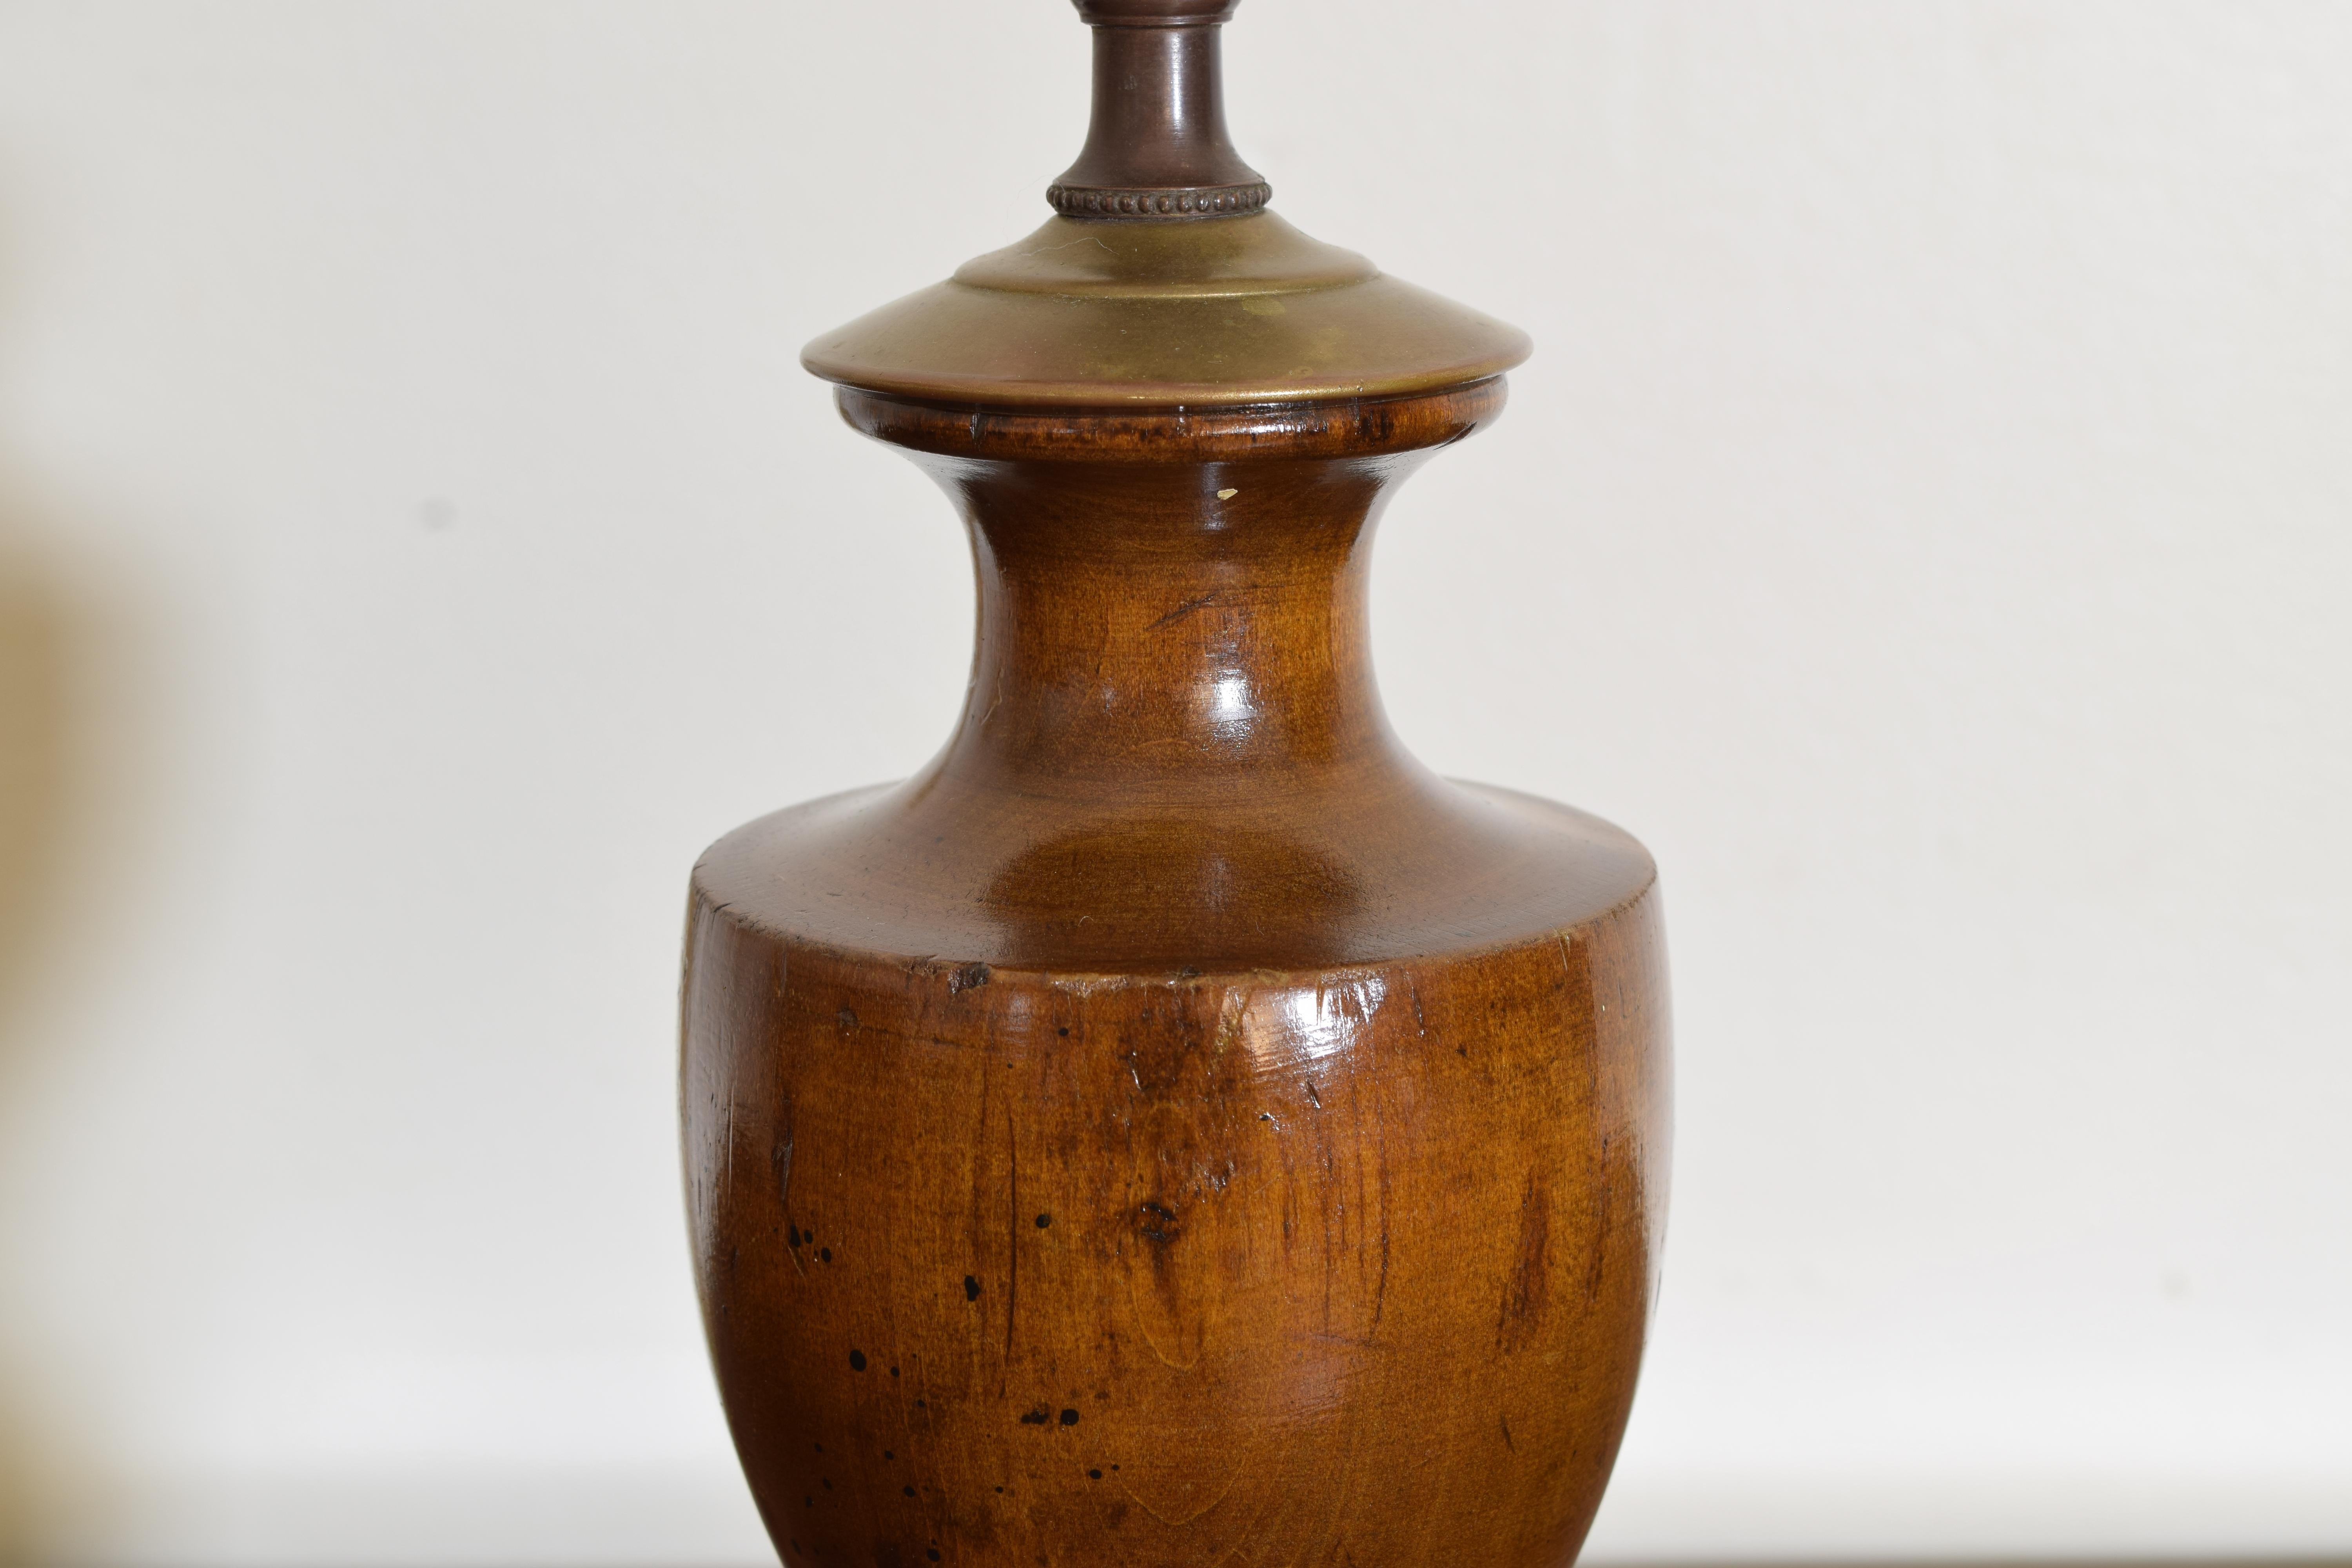 20th Century Continental Neoclassical Style Turned Walnut Urn-Form Table Lamp, ca. 1900.